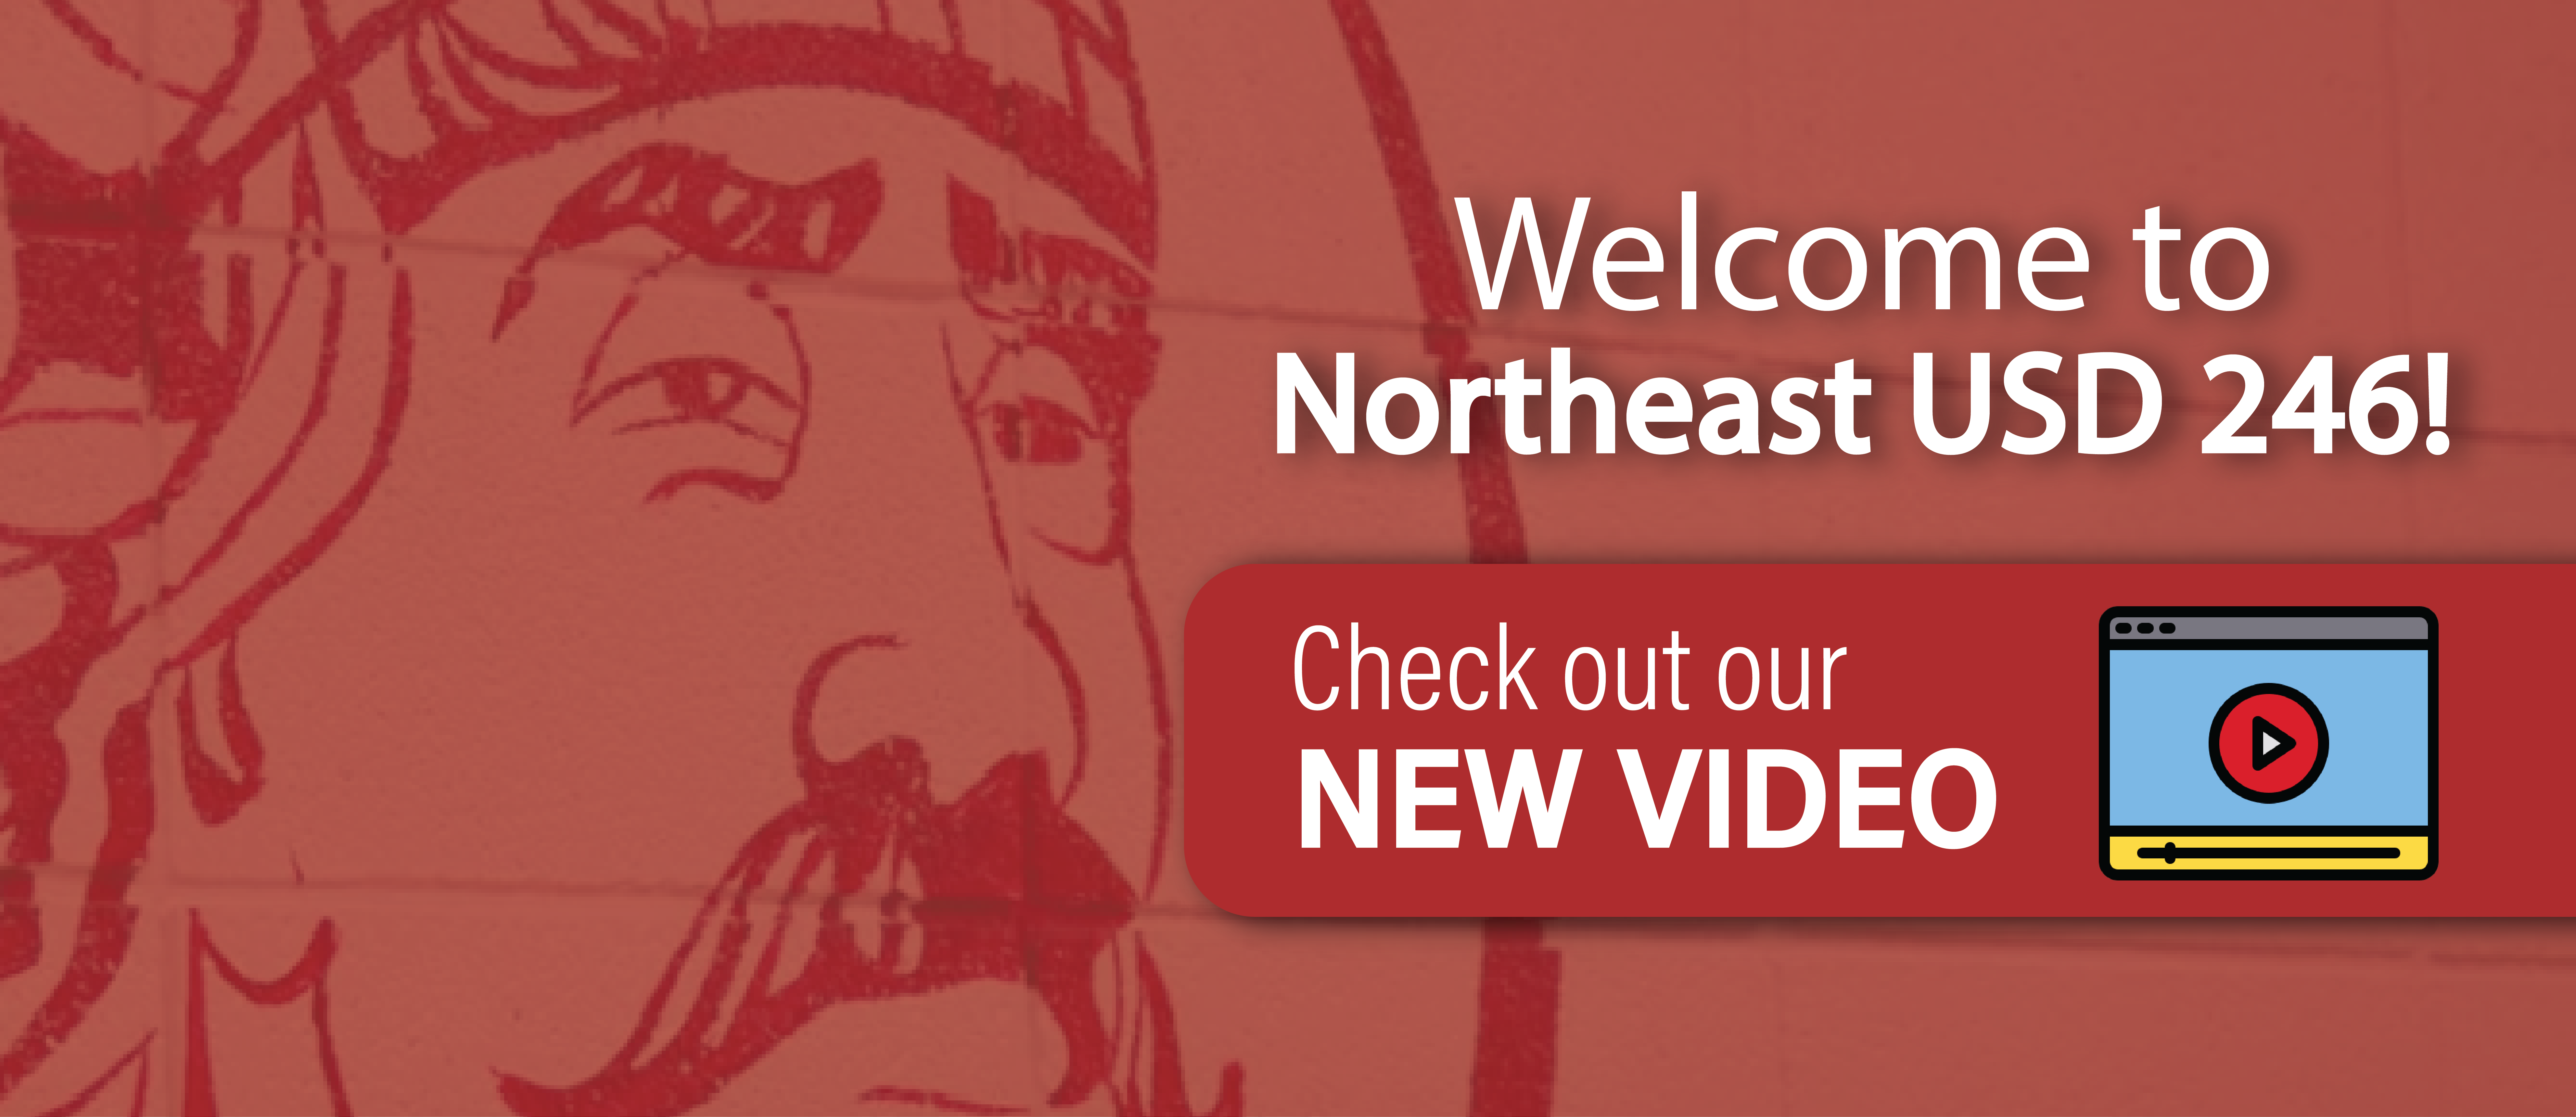 Welcome to USD 246 Northeast!  Check out our new video.